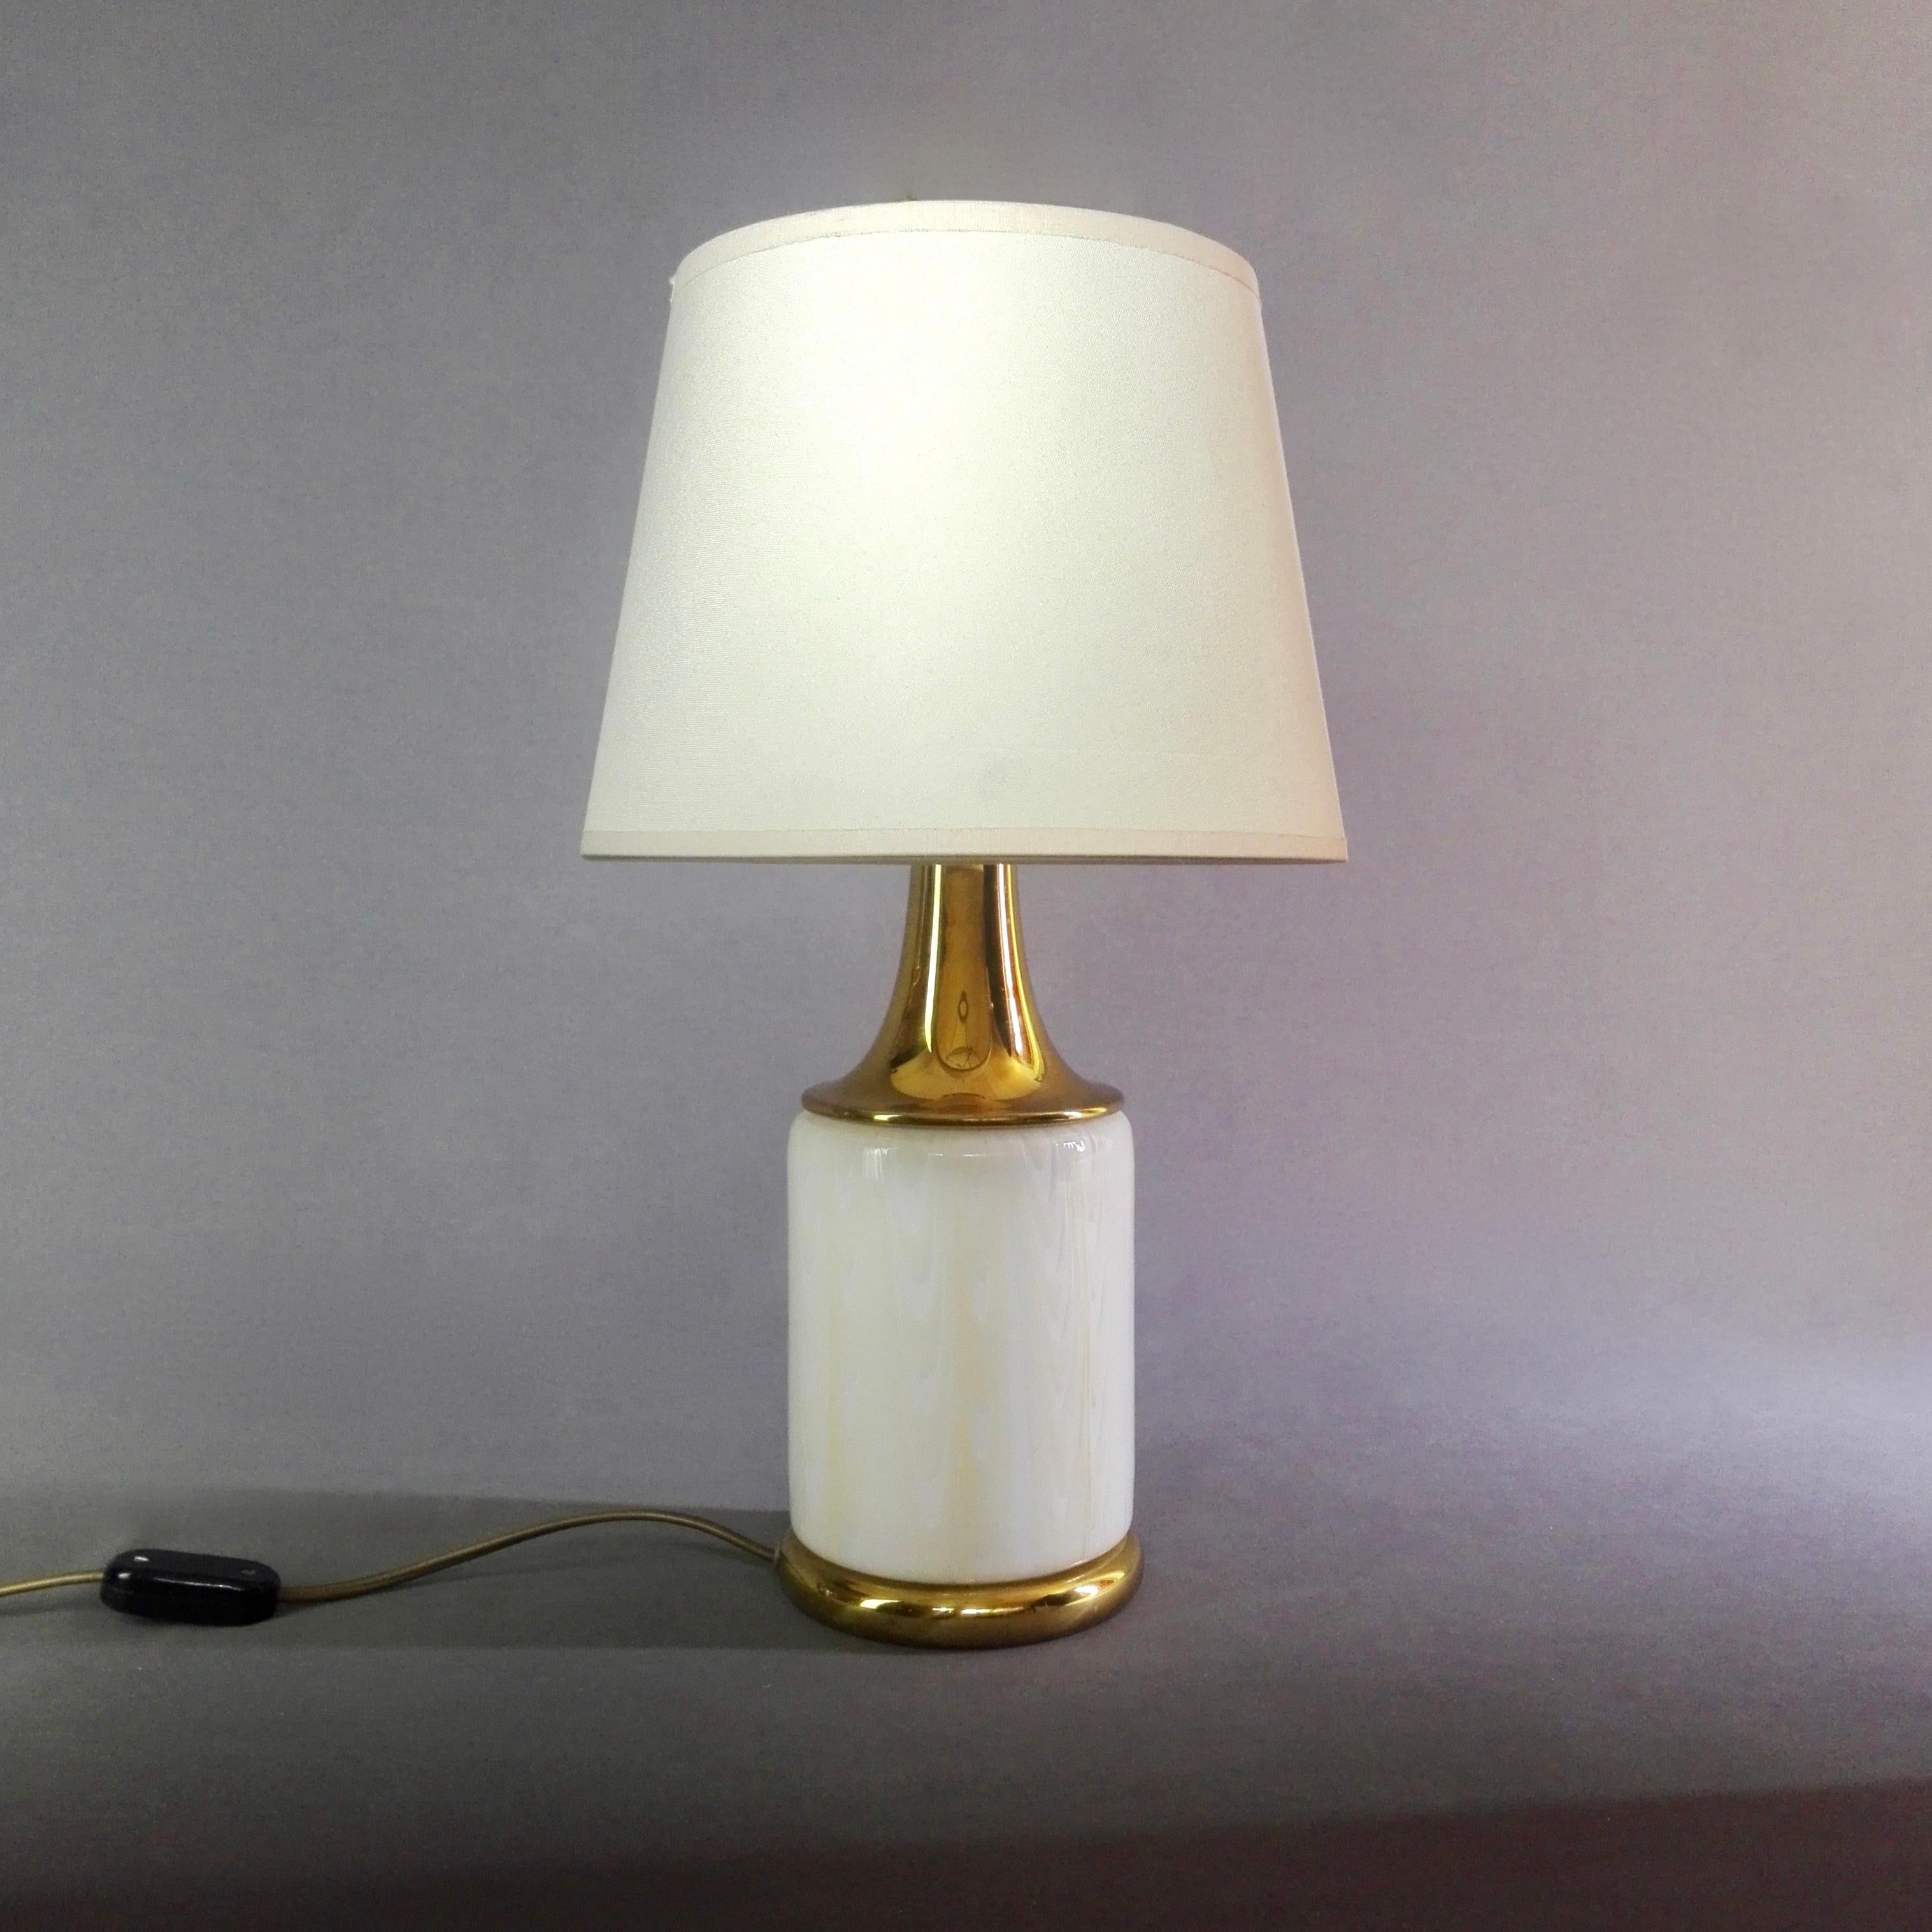 A fine Italian two-light brass and glass table lamp from the 1960s. No trademark present but its design is attributable to F.Fabbian. The lamp consists of a solid brass base, a cylindrical Murano art glass shade worked in festoons and a brass